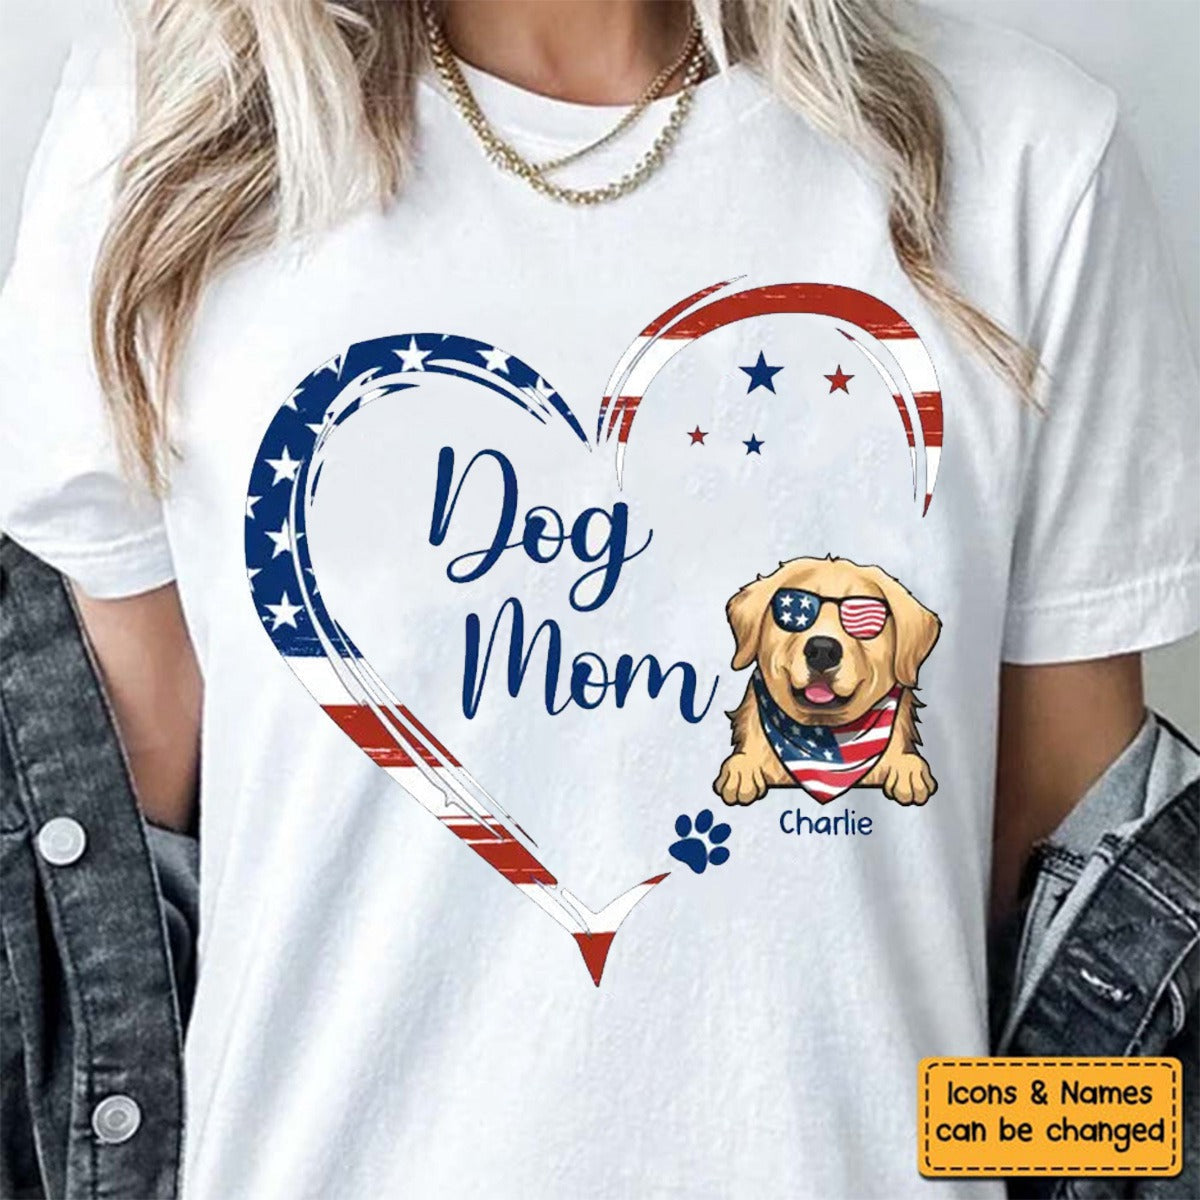 Dog & Cat Personalized Custom Unisex T-shirt,4th Of July, Gift For Pet Owners, Pet Lovers